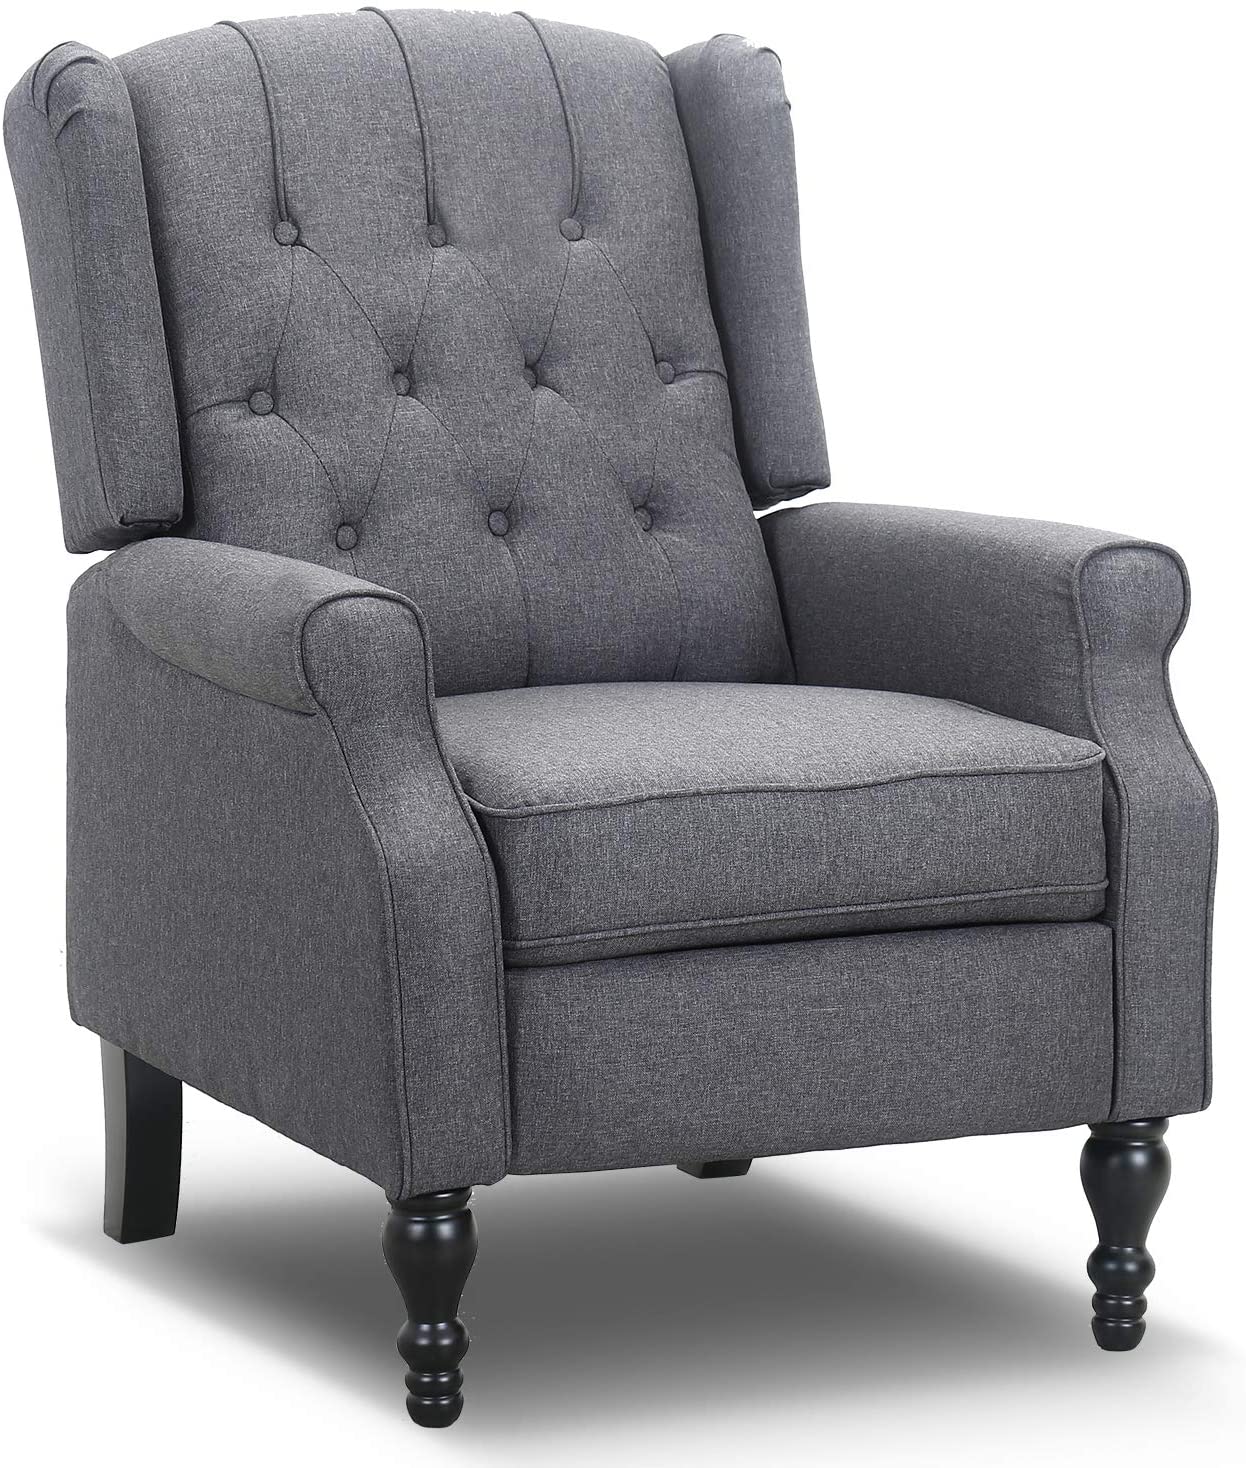 Bonzy Home Wingback Fabric Recliner Chair